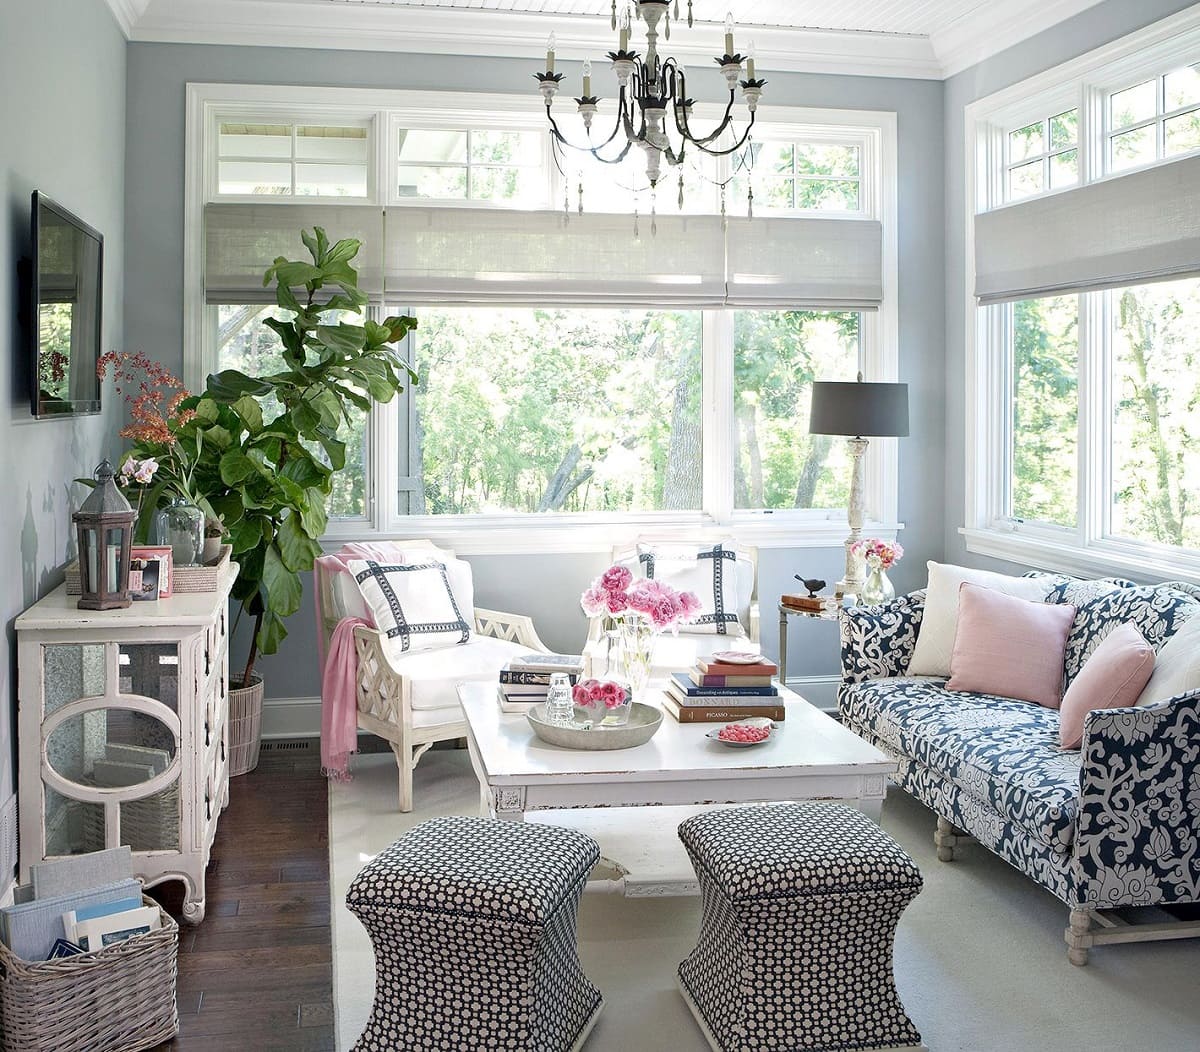 How To Decorate A Small Sunroom On A Budget